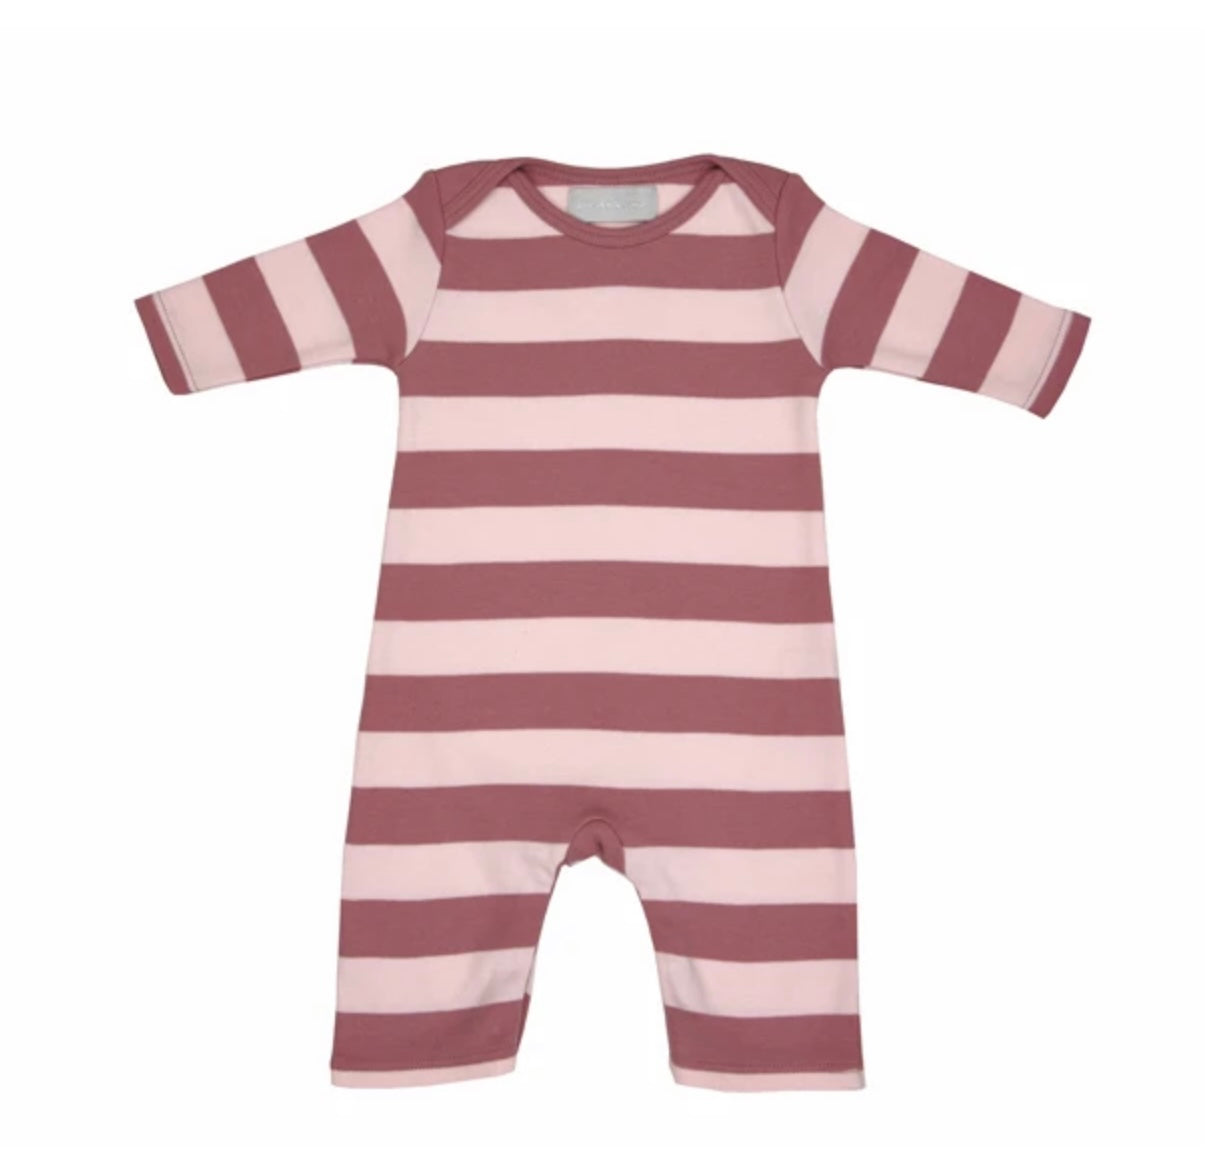 Vintage and Powder Pink Striped All-in-One